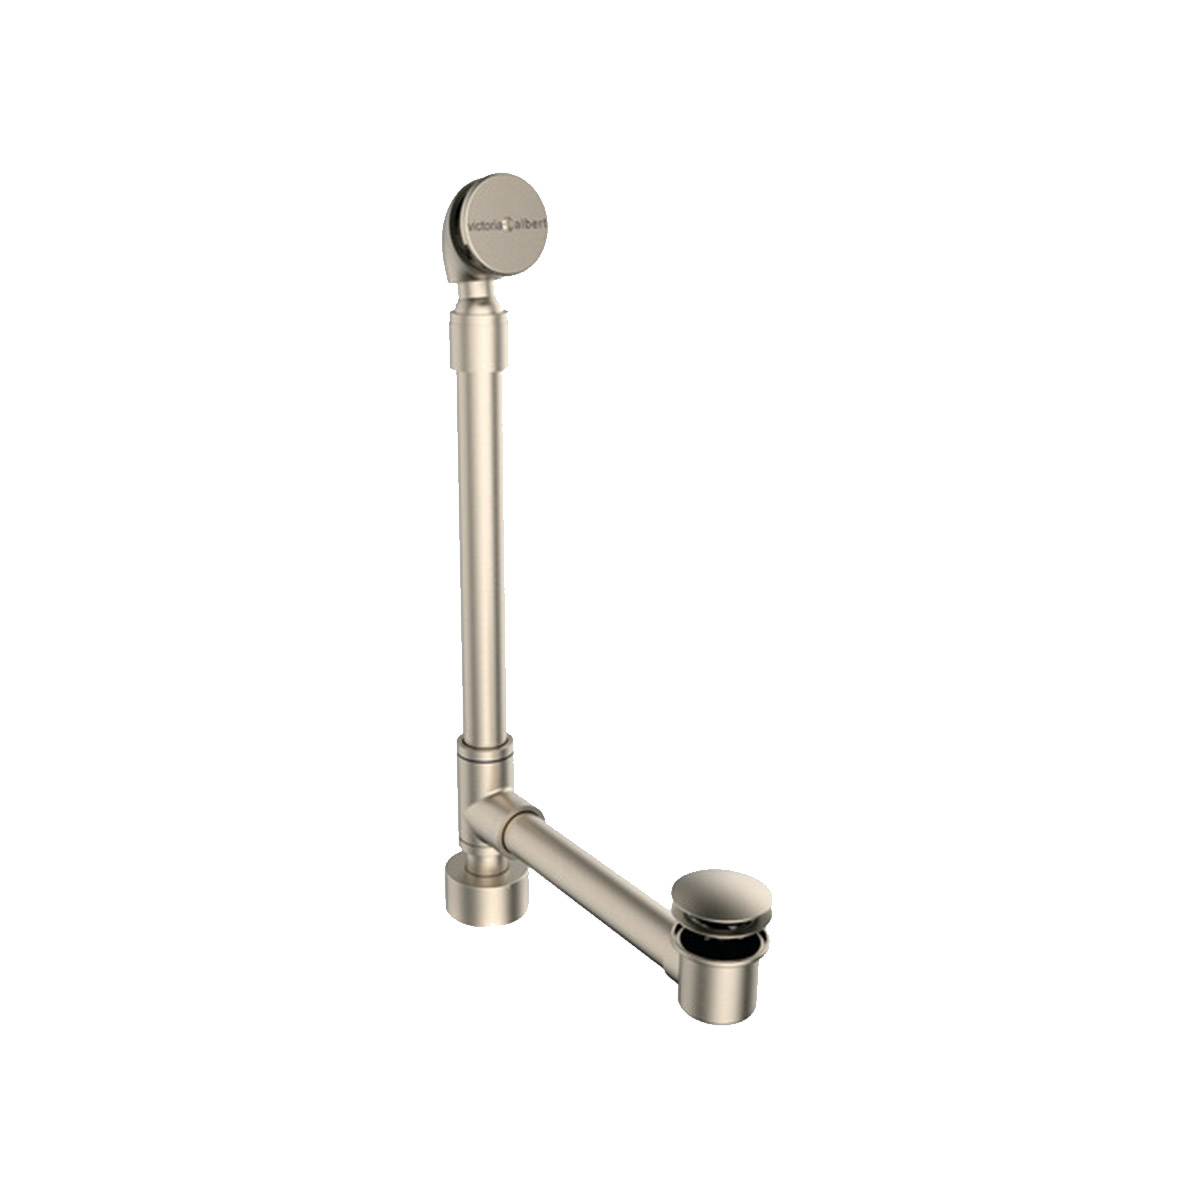 Victoria + Albert Kit 50 exposed bath waste with overflow in Brushed Nickel. Imported and distributed in Australia by Luxe by Design, Brisbane.